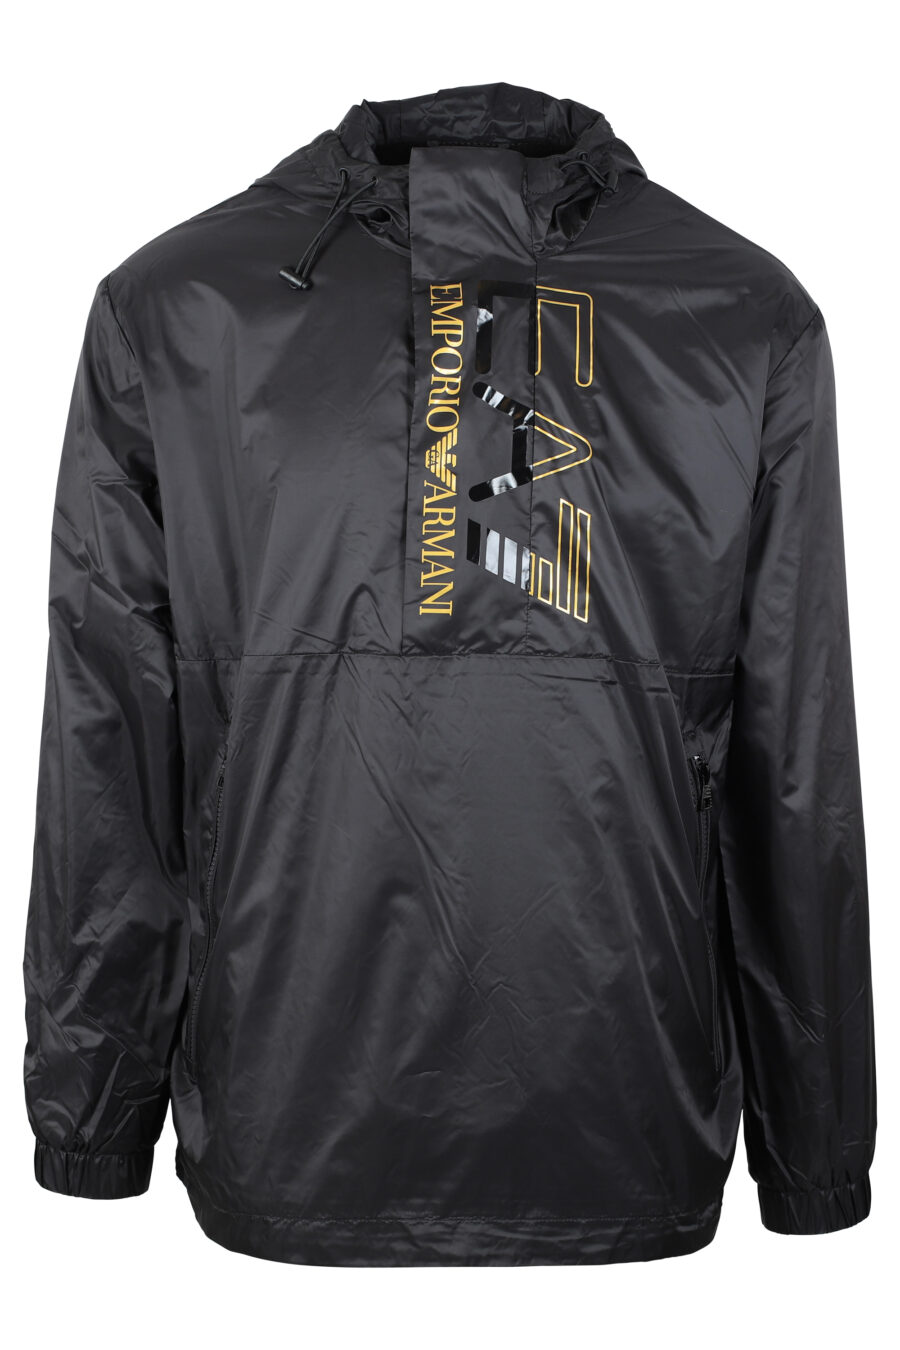 Black waterproof jacket with hood and logo mix vertical - IMG 4661